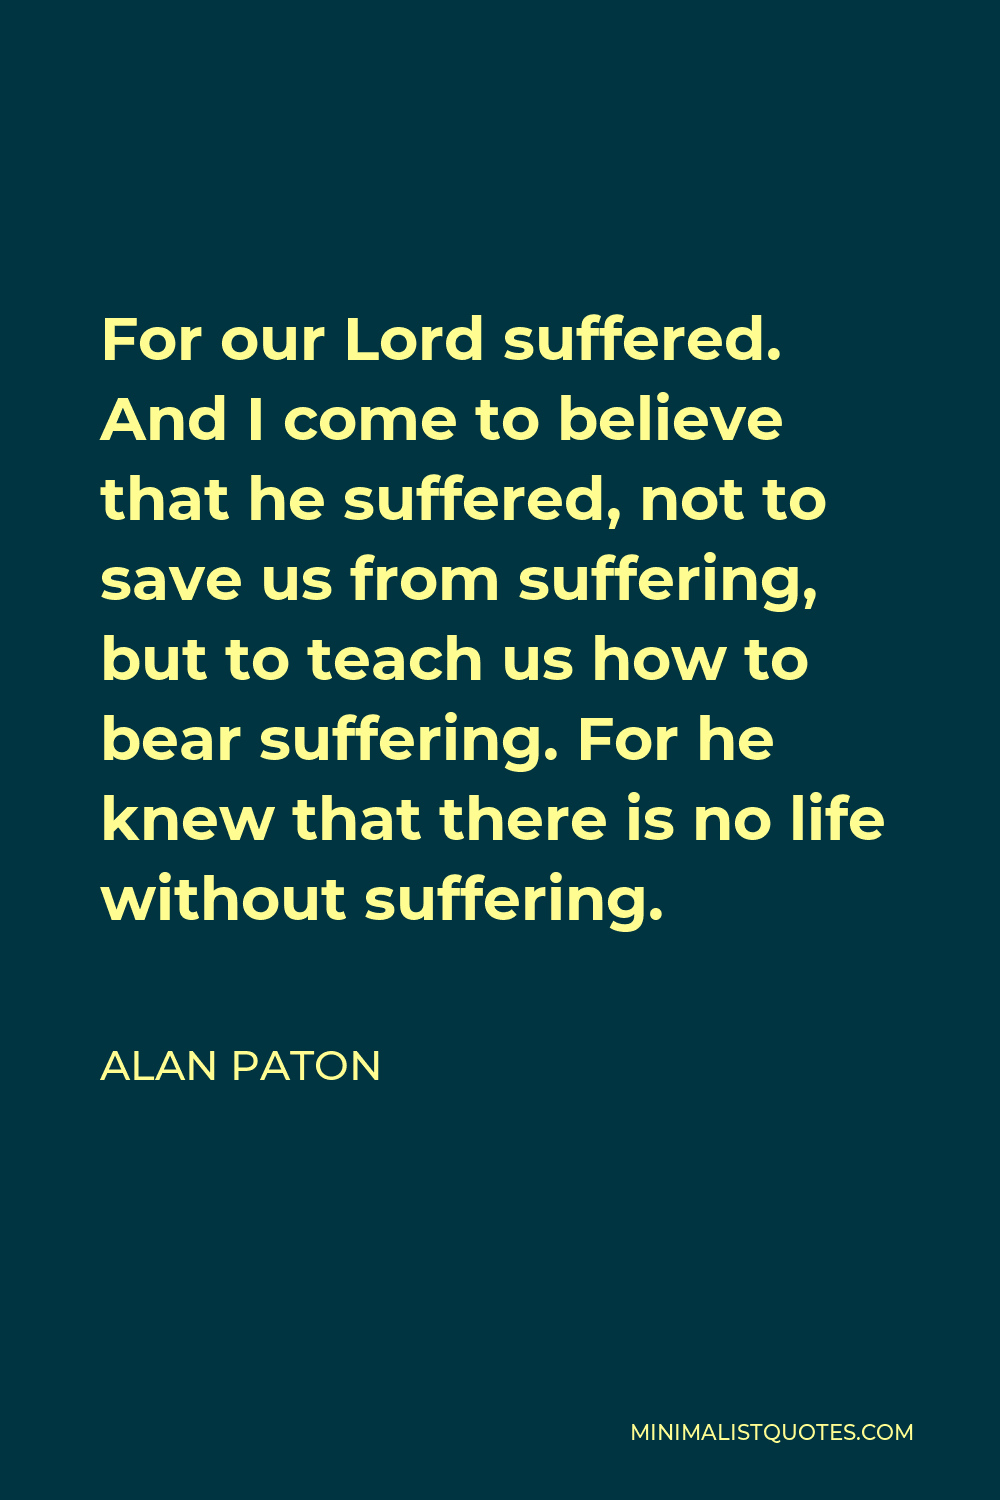 Alan Paton Quote - For our Lord suffered. And I come to believe that he suffered, not to save us from suffering, but to teach us how to bear suffering. For he knew that there is no life without suffering.